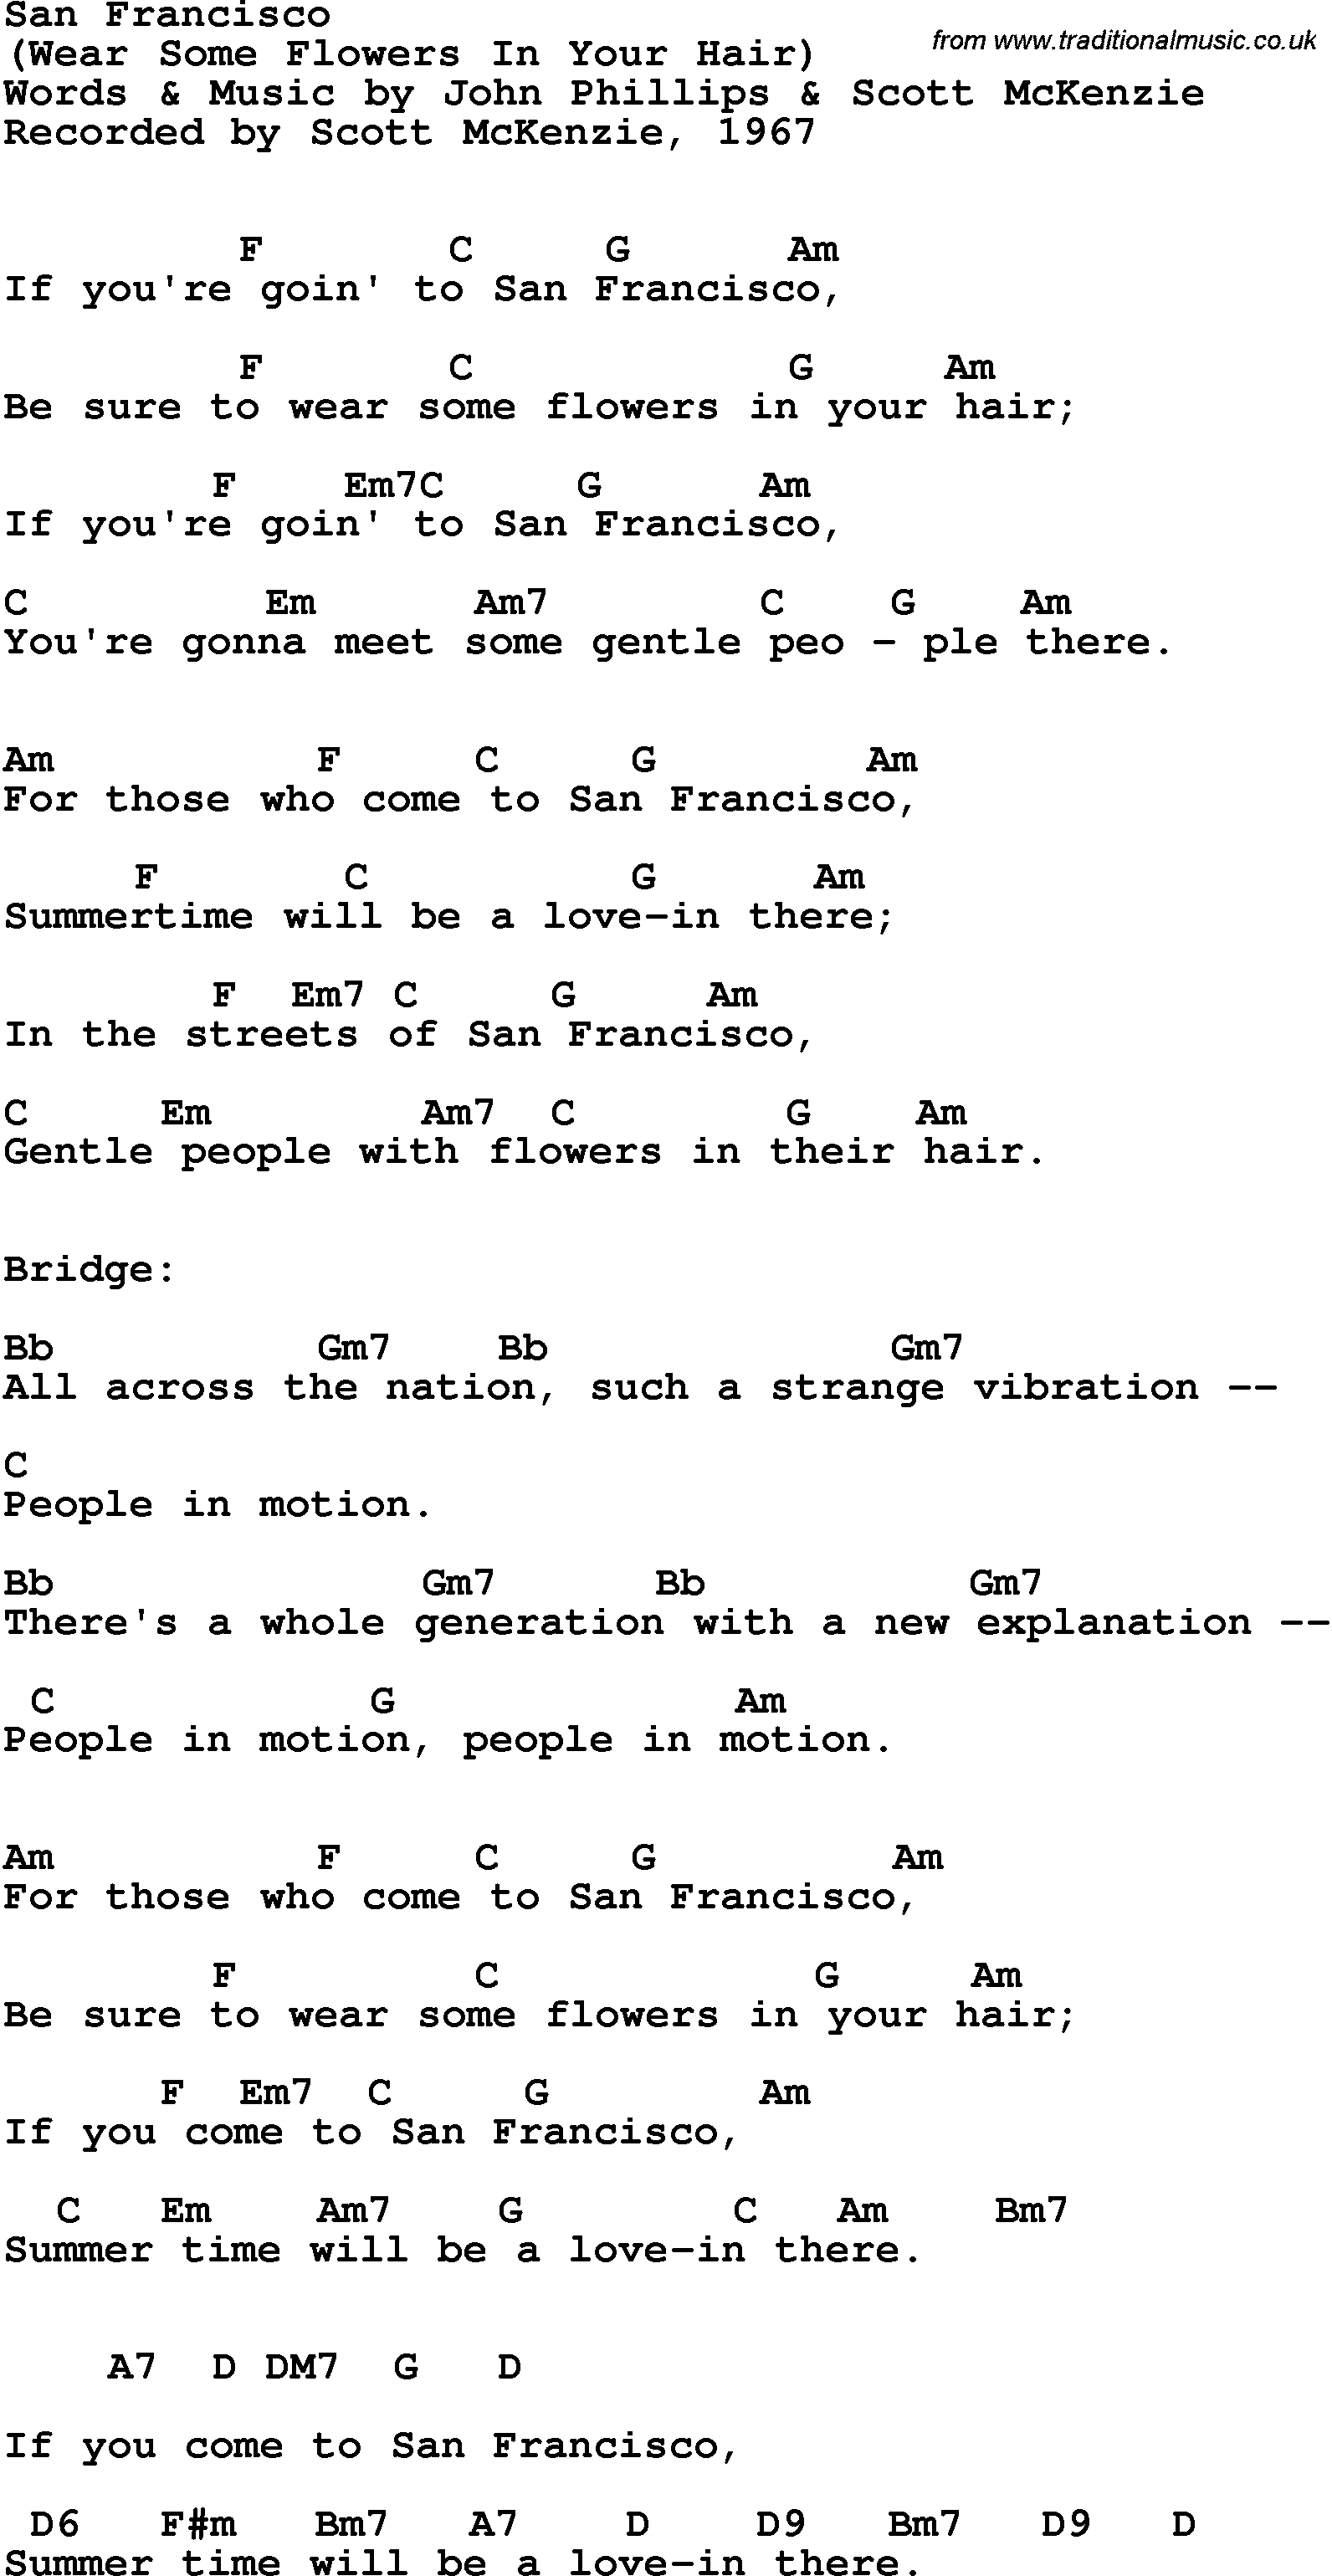 Song Lyrics with guitar chords for San Francisco (Wear Some Flowers In Your Hair) - Scott Mckenzie, 1967